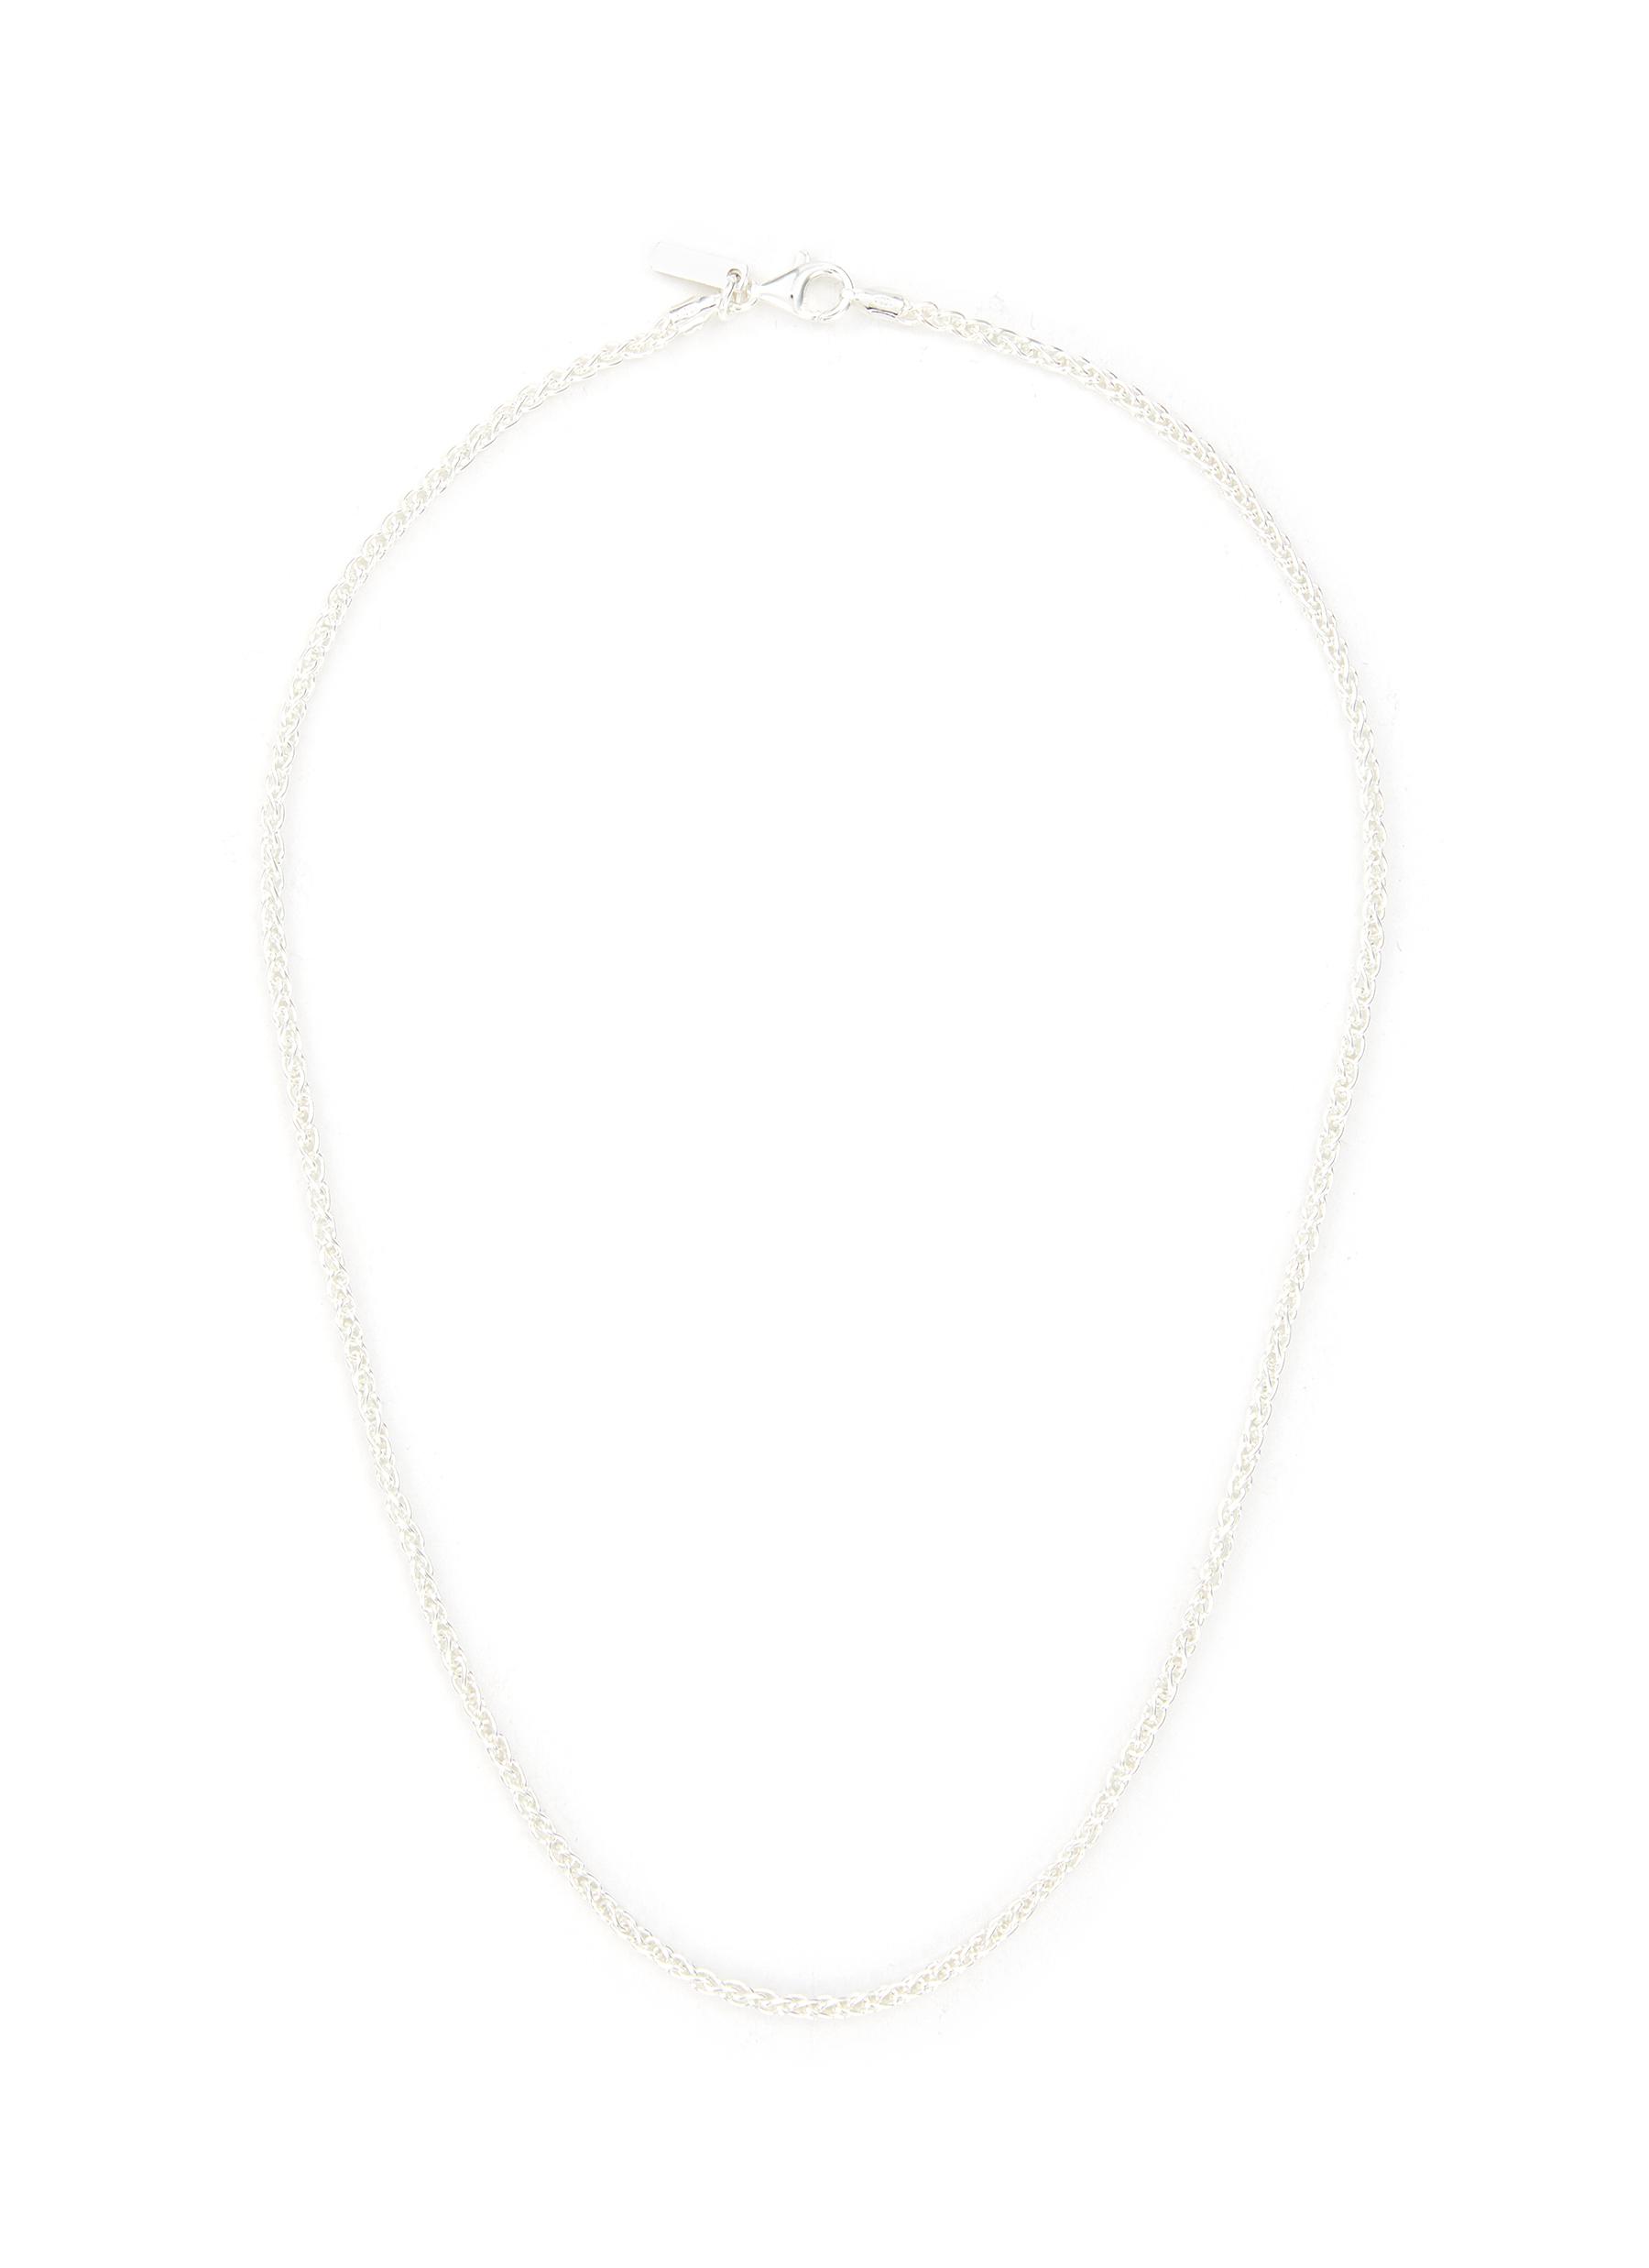 HATTON LABS, Rope Sterling Silver Chain Necklace, Men